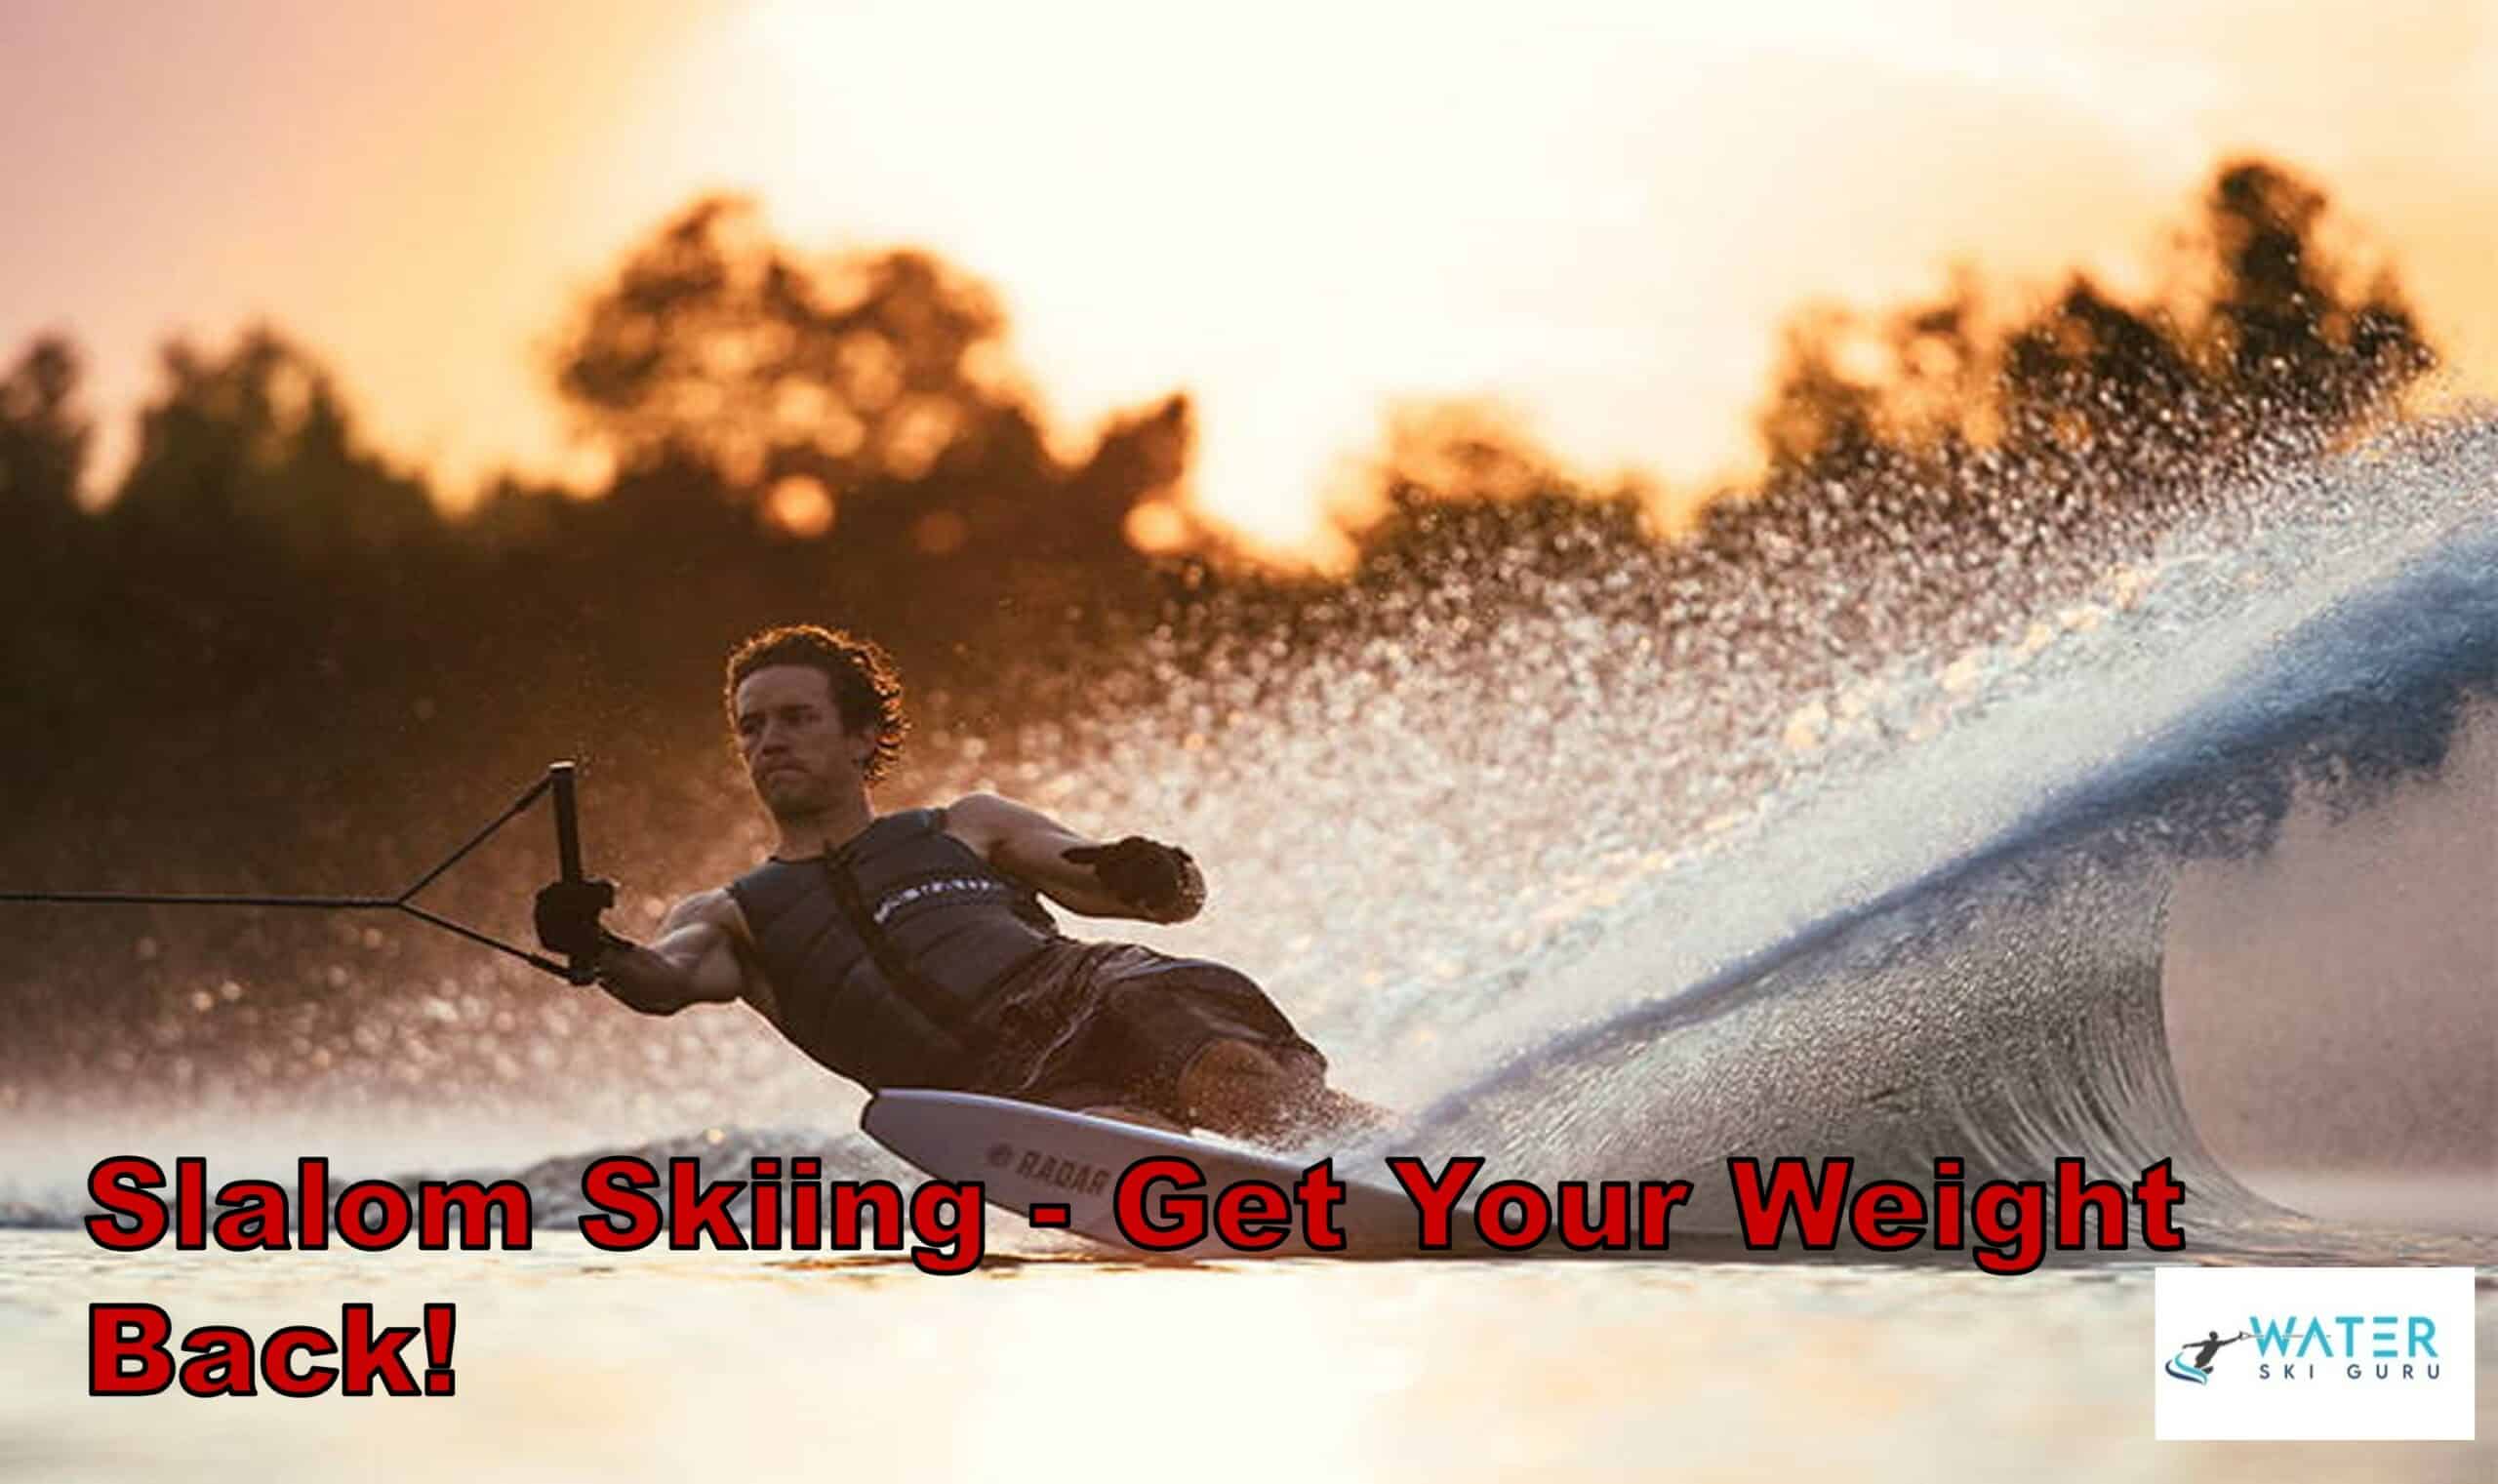 Slalom Skiing - Get Your Weight Back